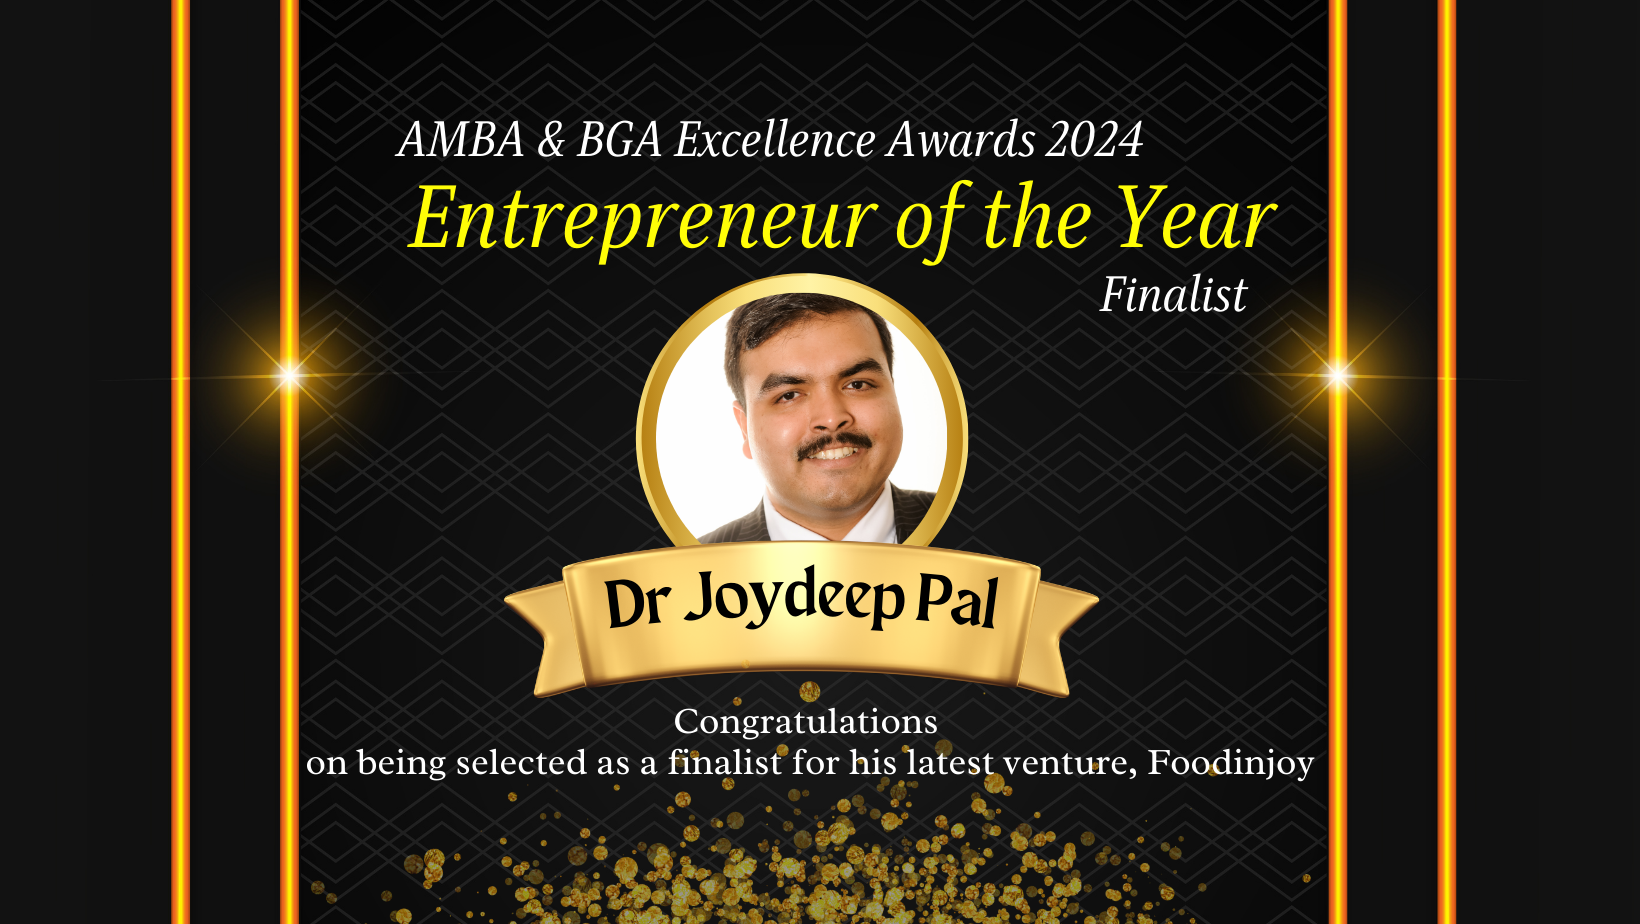 Dr Joydeep Pal Named Finalist for the Entrepreneur of the Year Award